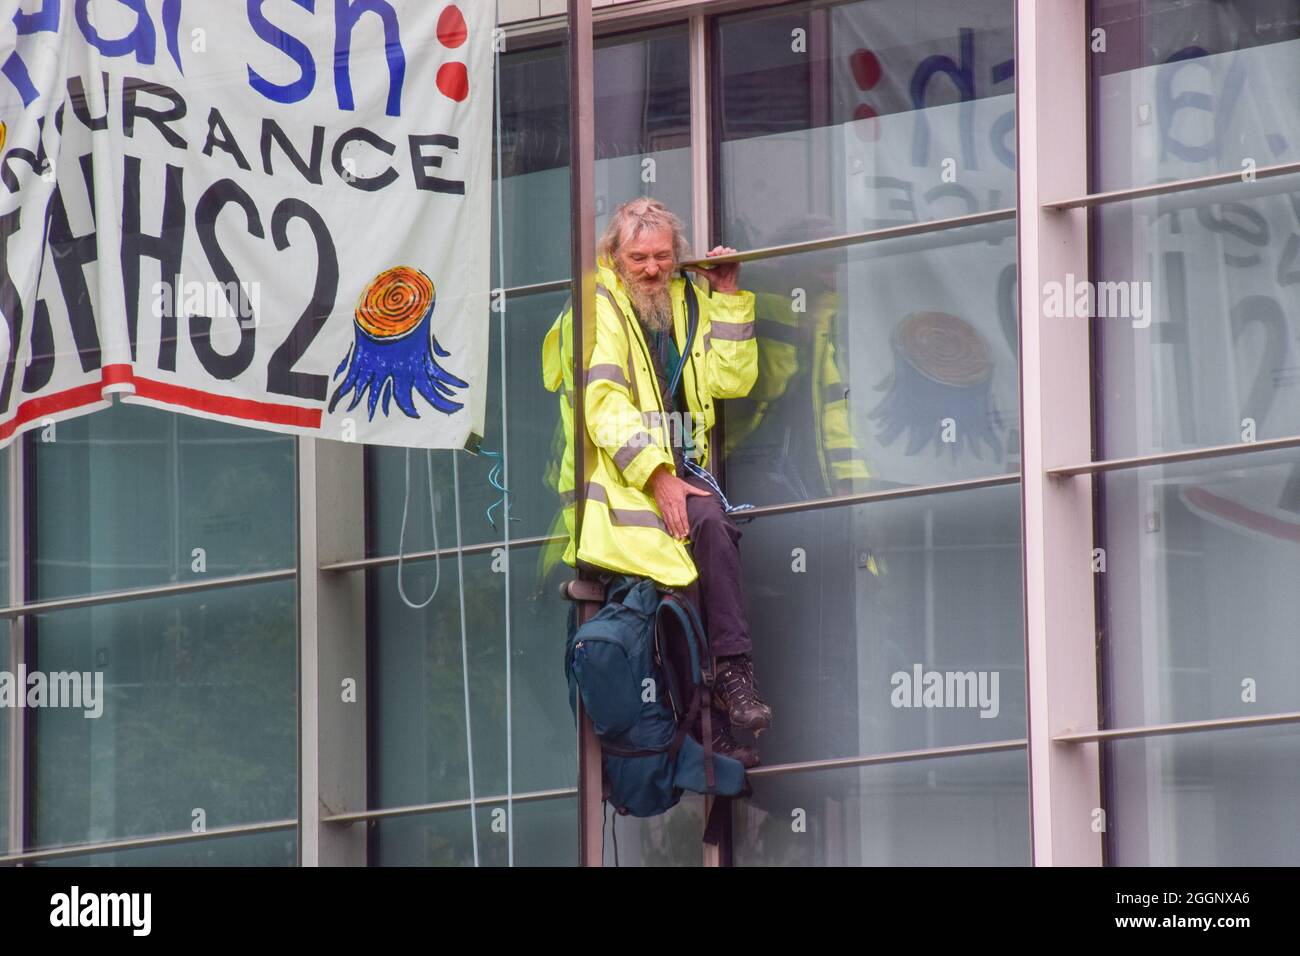 London, United Kingdom. 2nd September 2021. Two HS2 protesters scaled Marsh Insurance offices in the City of London, demanding they stop insuring the HS2 (High Speed 2) railway system. (Credit: Vuk Valcic / Alamy Live News) Stock Photo